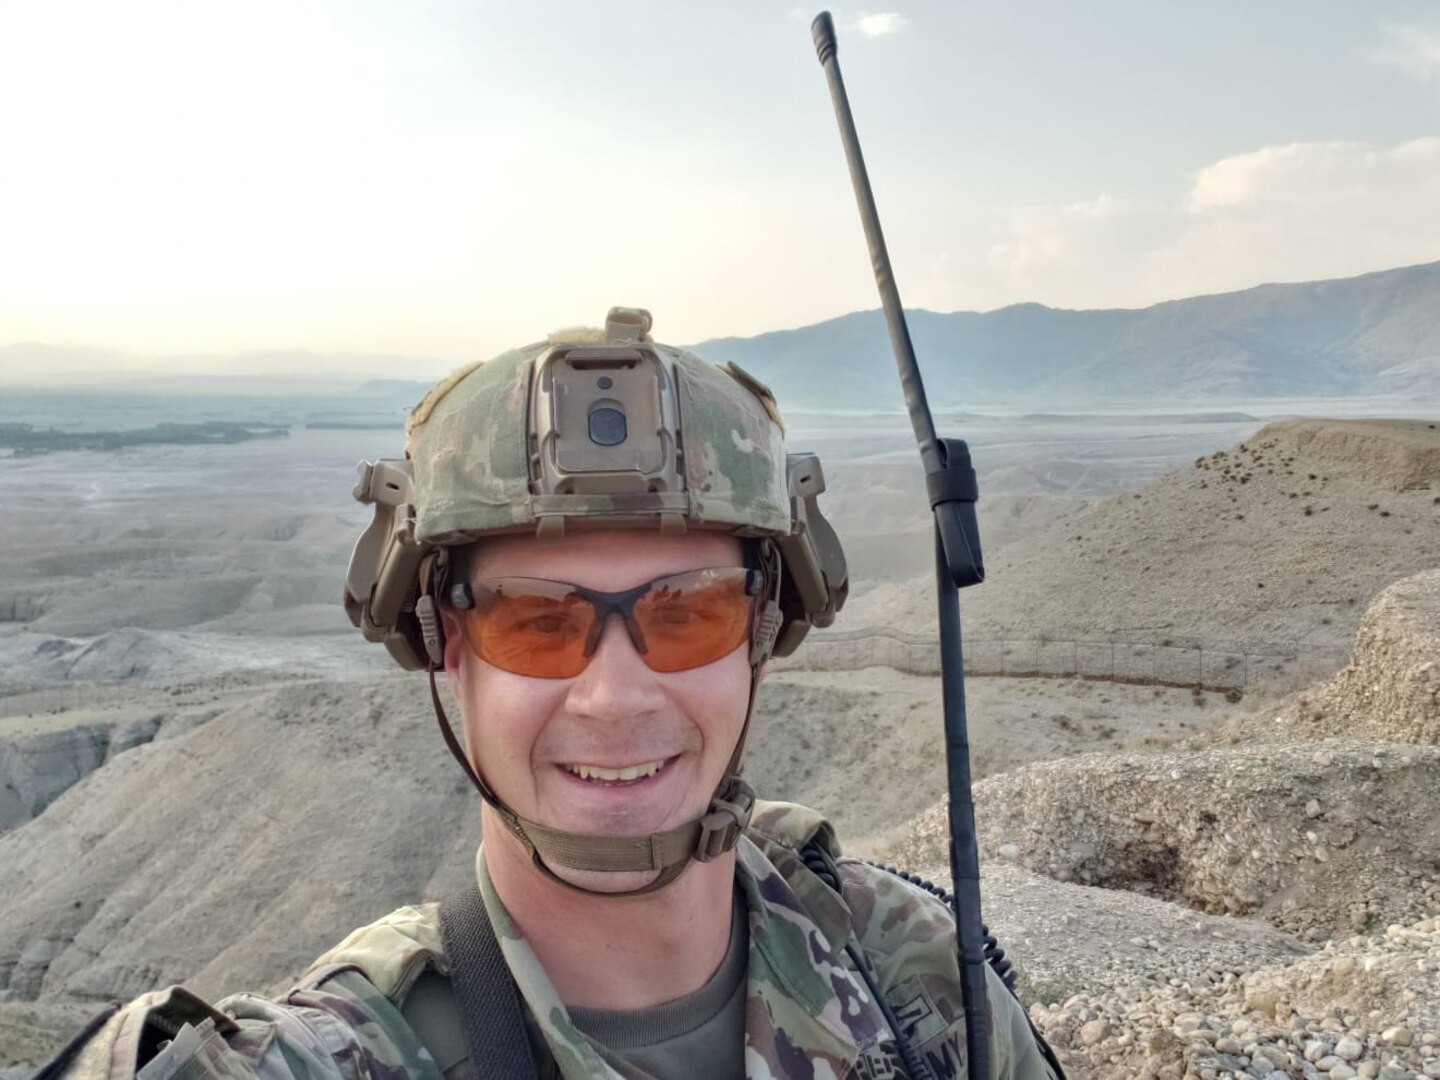 Staff Sgt. Benjamin Sieg, a quick reaction force squad leader in A Company, 1st Battalion, 128th Infantry, in Afghanistan. The 1st Battalion, 128th Infantry, deployed to Afghanistan in July 2019, and is acting as a “Guardian Angel” security element for the 3rd Security Force Assistance Brigade.